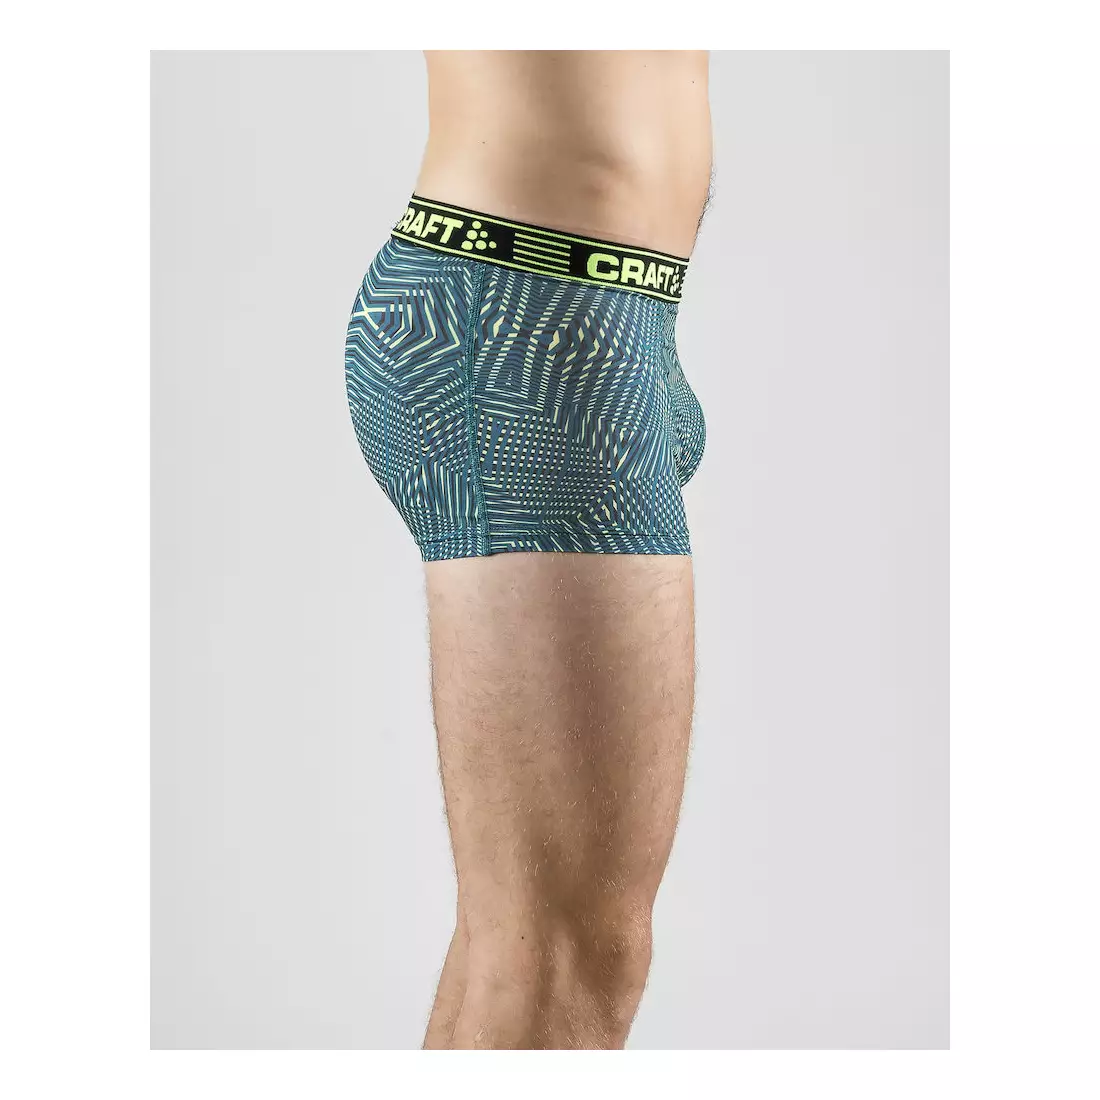 CRAFT men's sports boxer shorts 3-INCH 1905488-9657